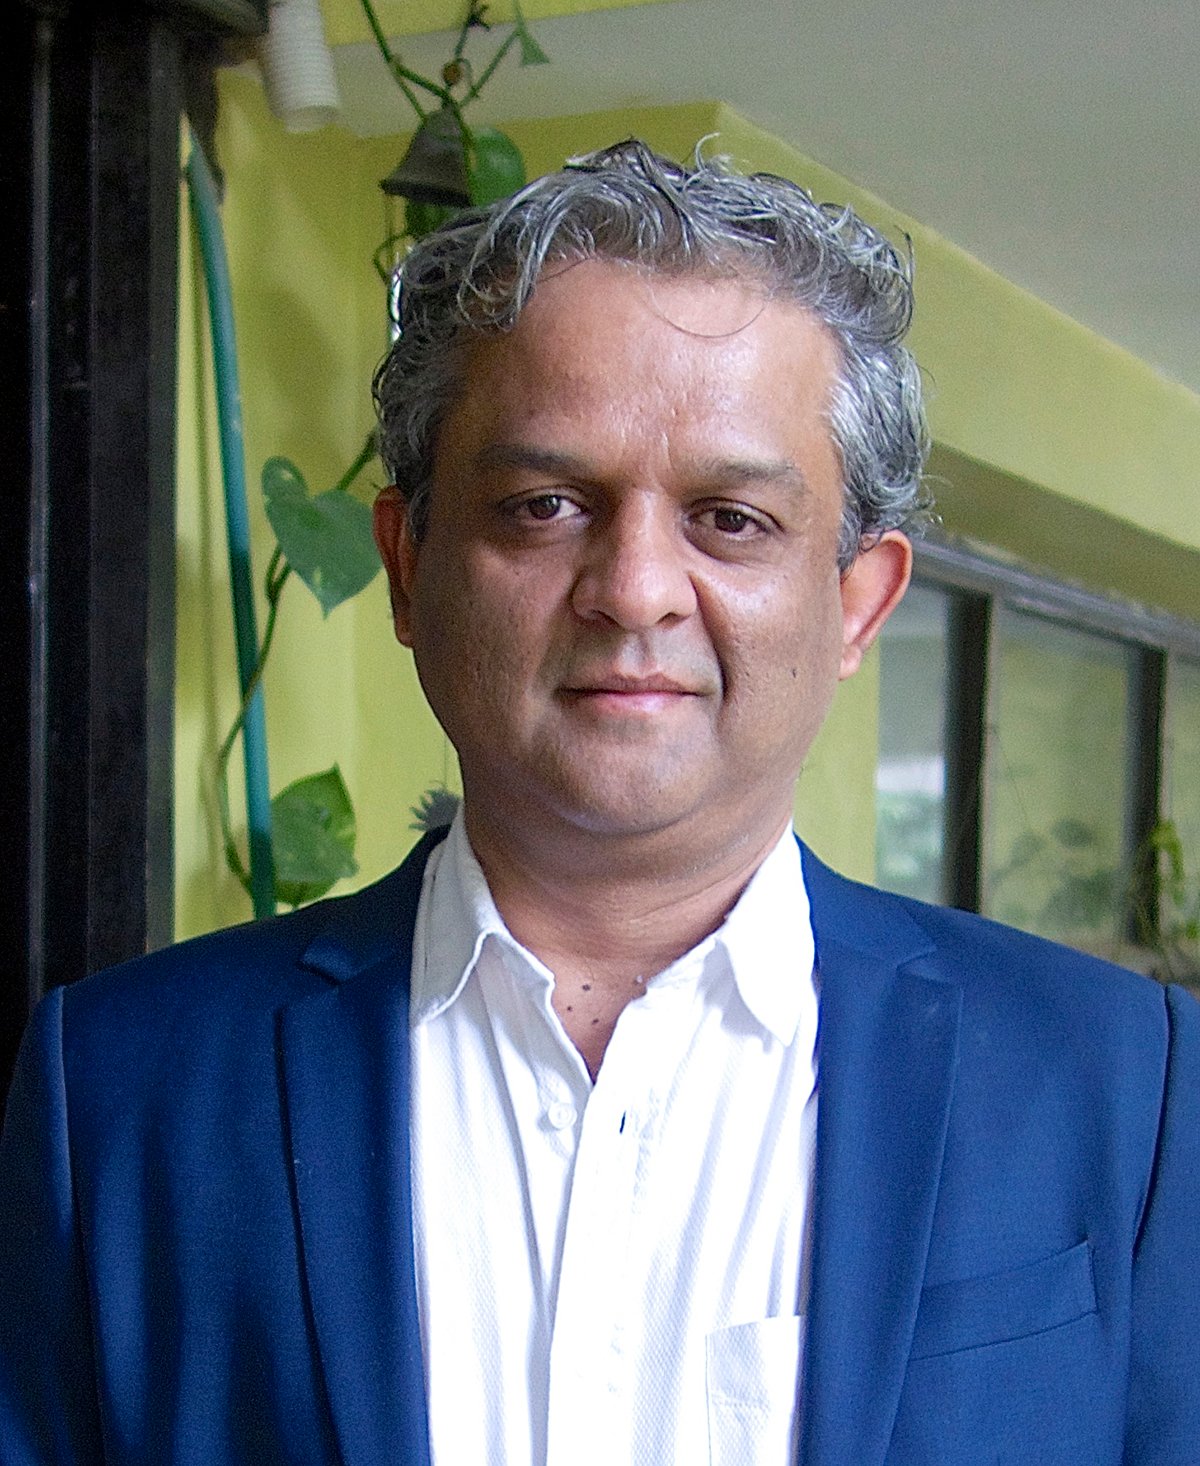 Dr Amit Sharma, Head, Structural and Computational Biology Group, International Centre for Genetic Engineering and Biotechnology (ICGEB) & Infosys Prize winner 2015 (Life Sciences)